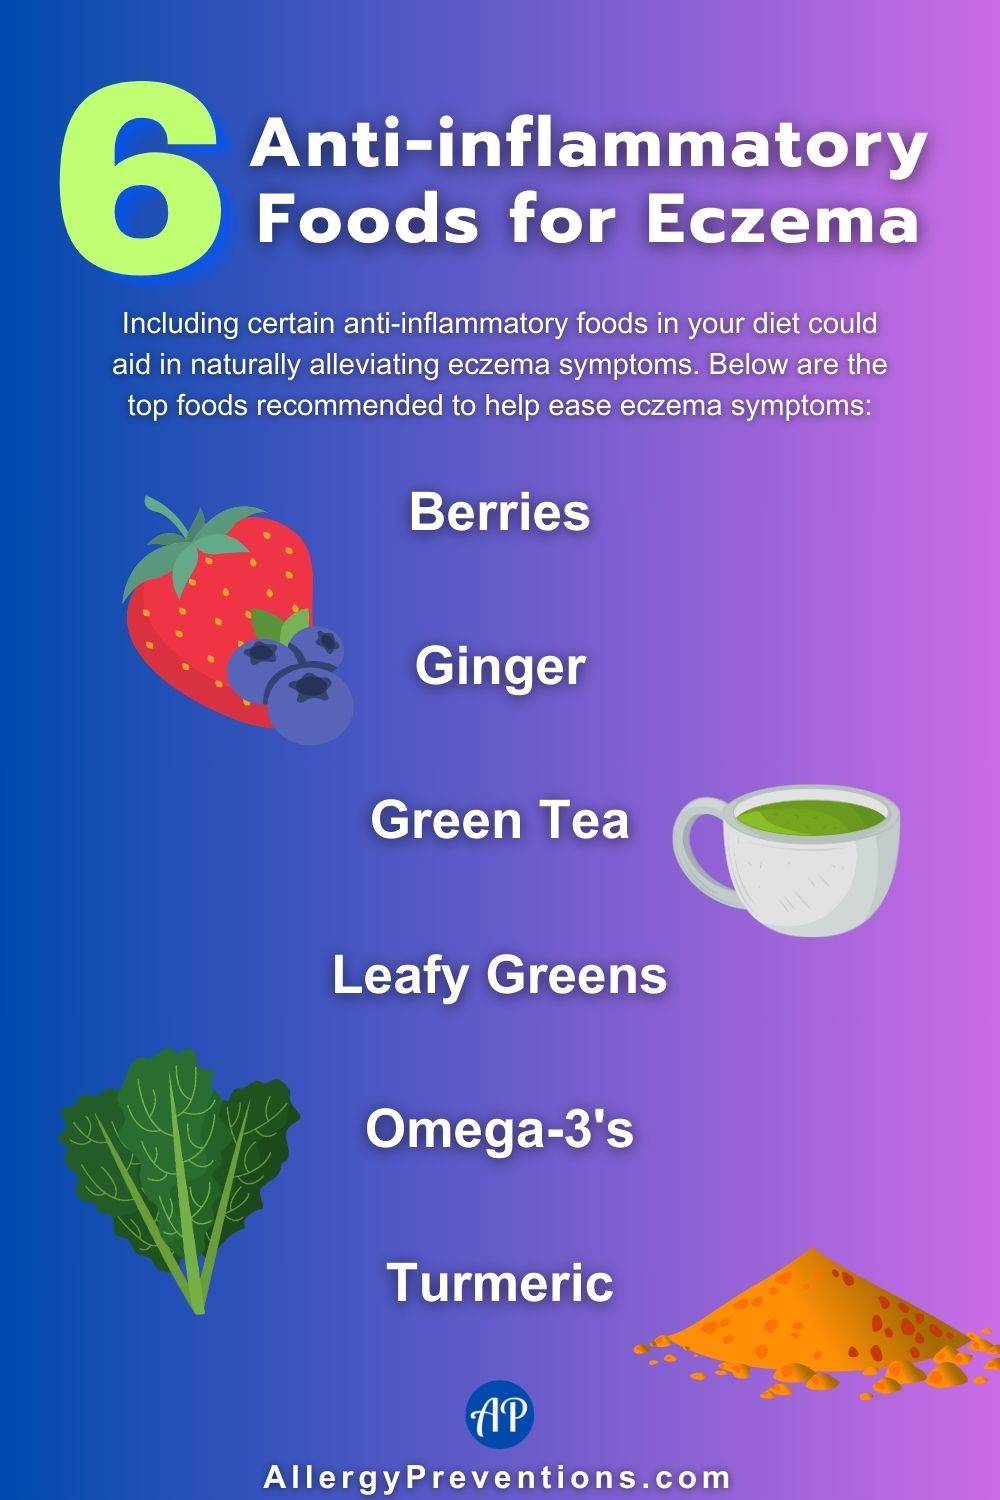 Anti-inflammatory Foods for Eczema Infographic. Including certain anti-inflammatory foods in your diet could aid in naturally alleviating eczema symptoms. Below are the top foods recommended to get rid of eczema symptoms: Berries, ginger, green tea, leafy greens, omega-3's, and turmeric.